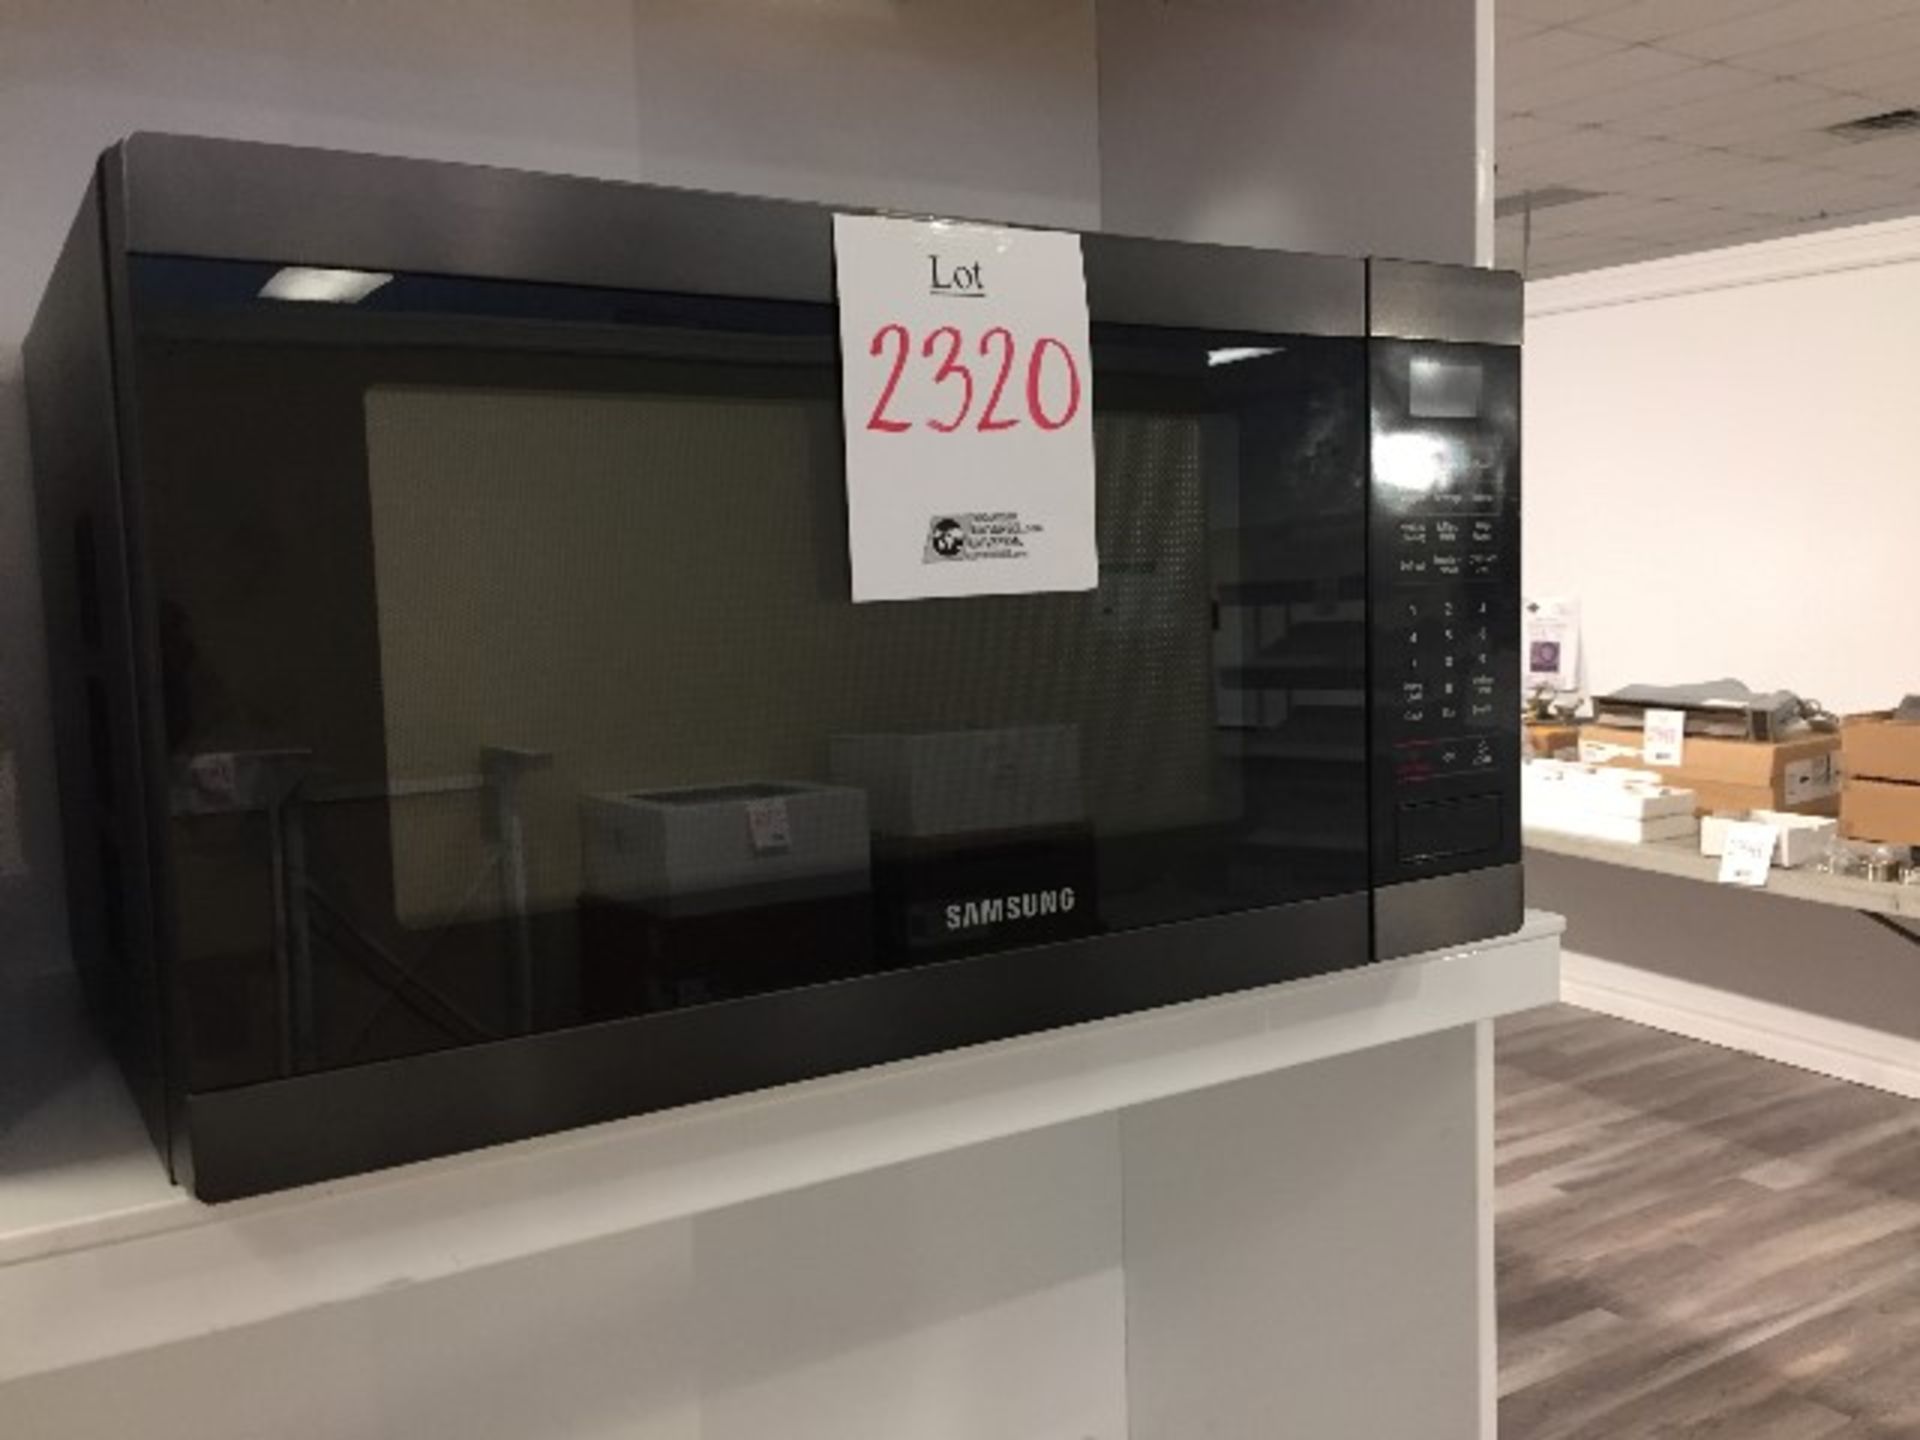 Samsung black stainless microwave oven, non working, AS IS/TEL QUEL